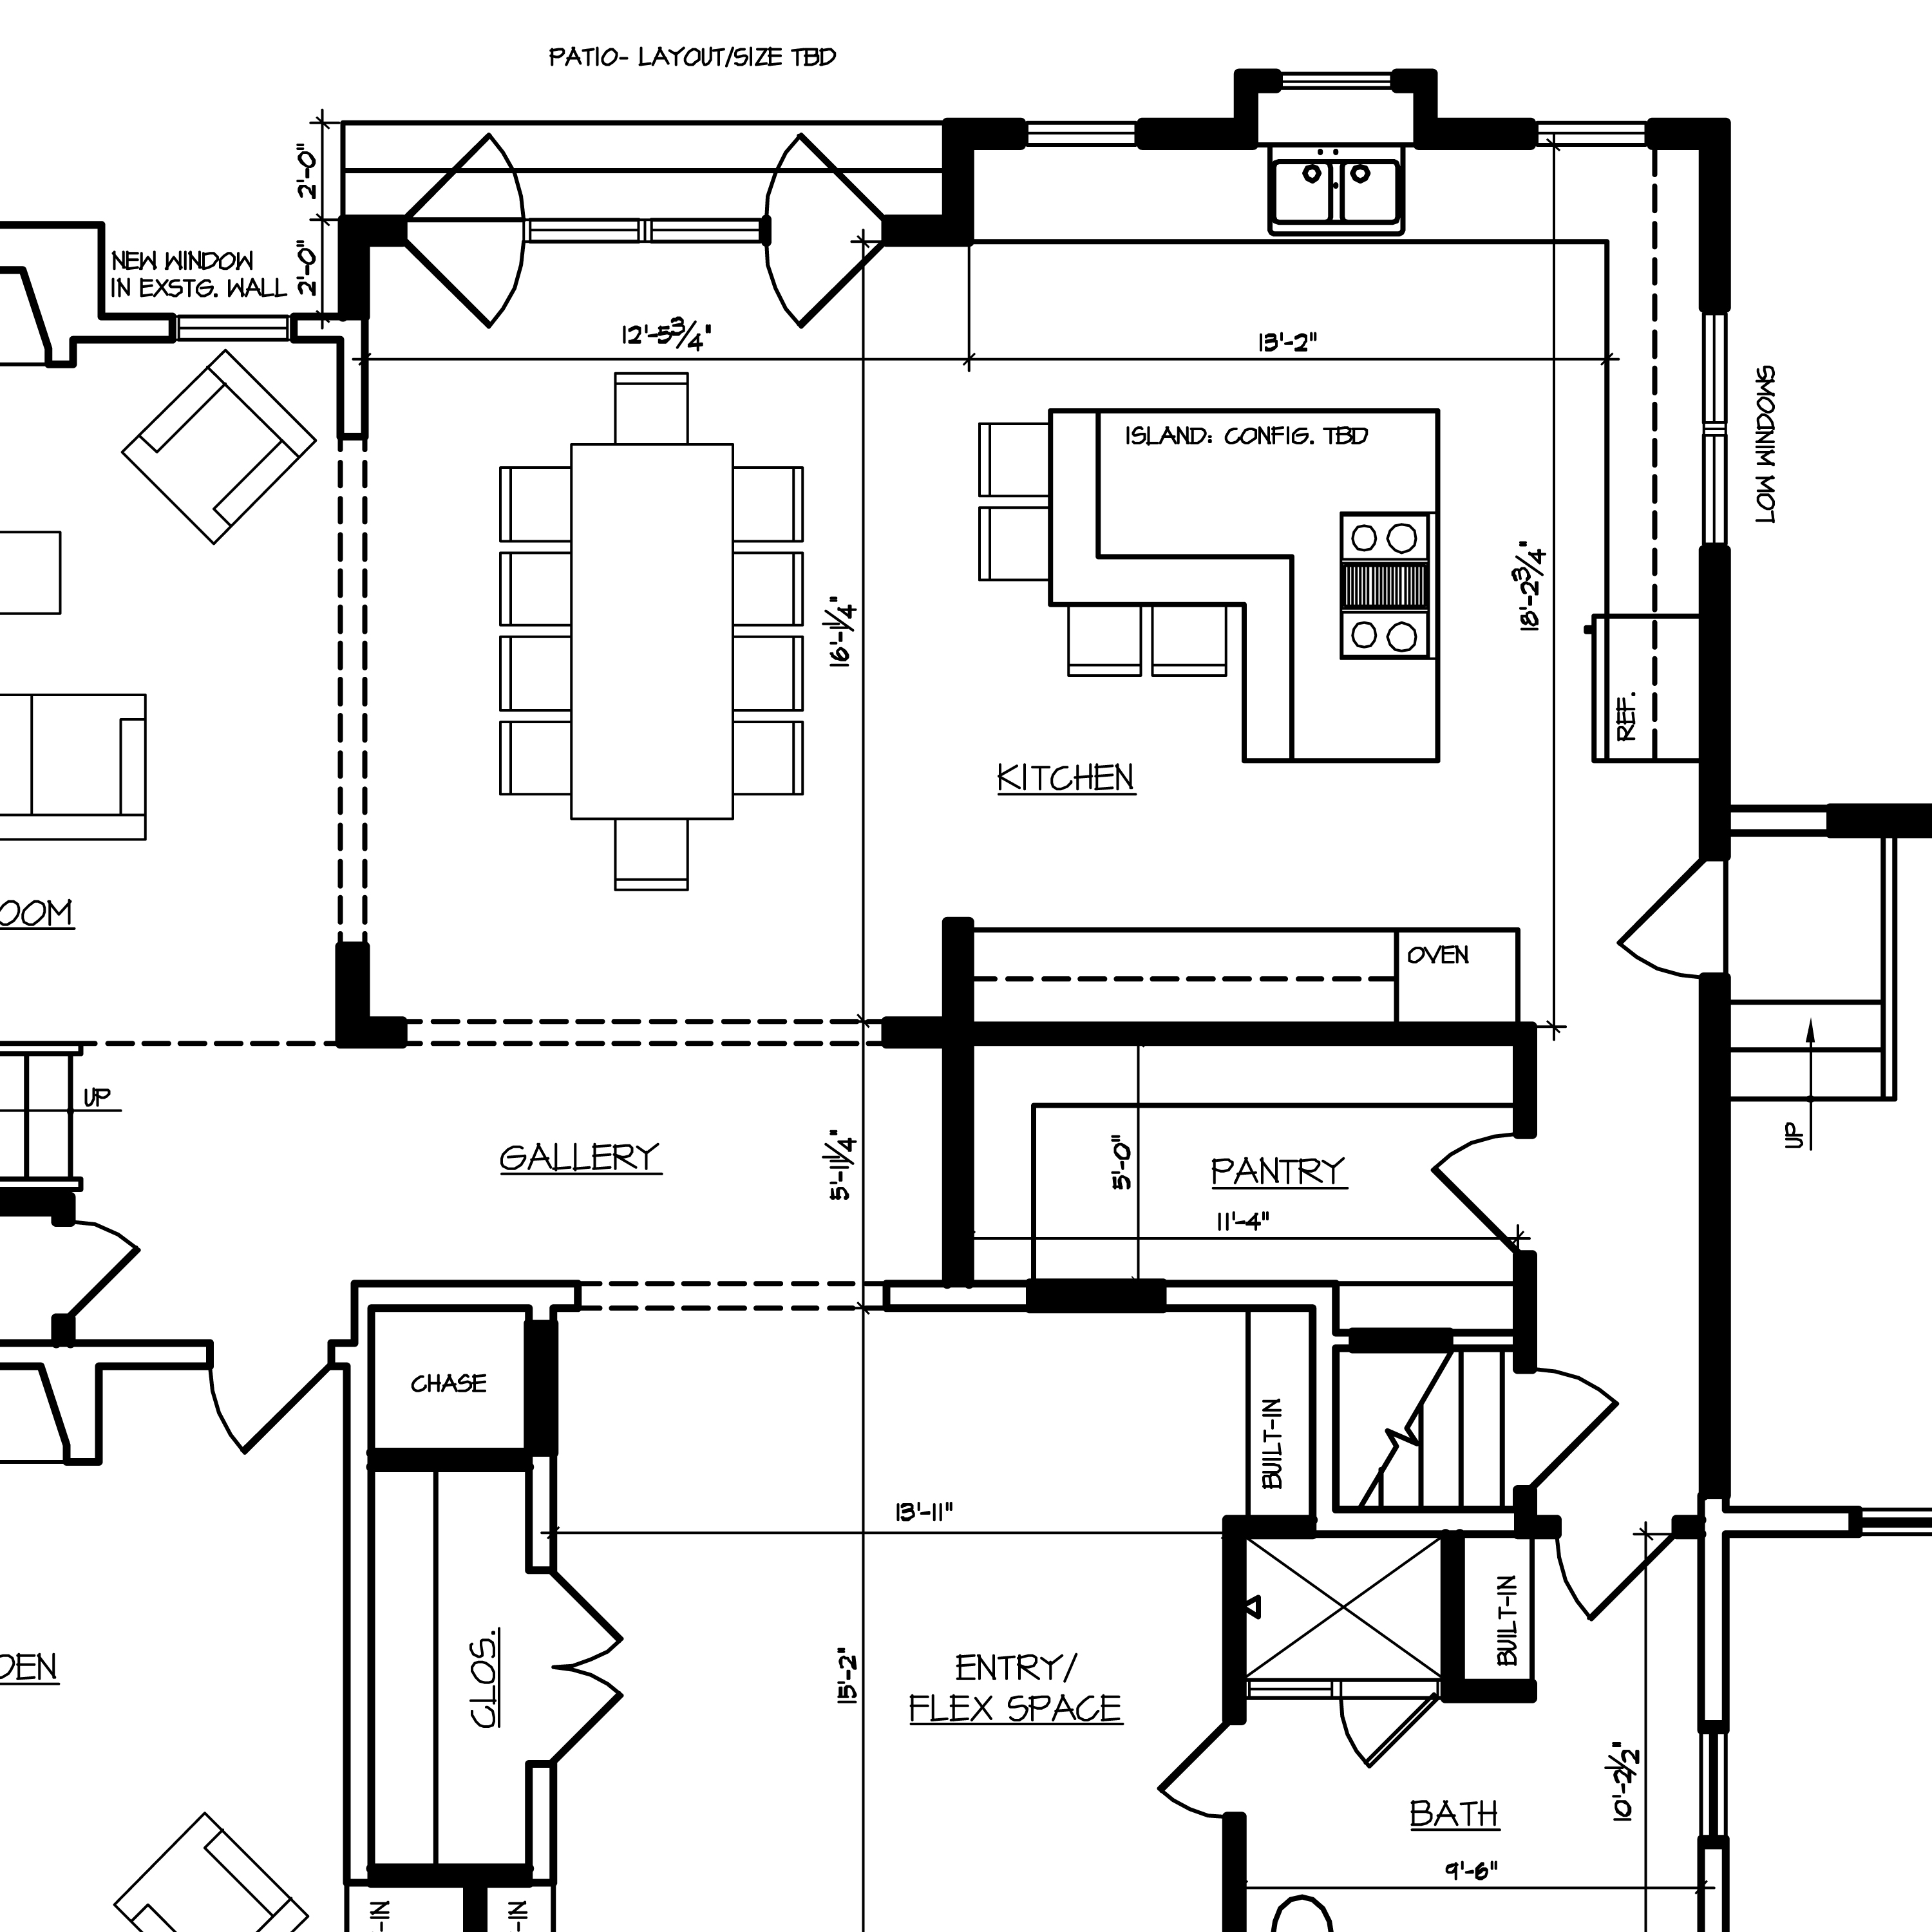 Kitchen Autocad Drawing at GetDrawings | Free download